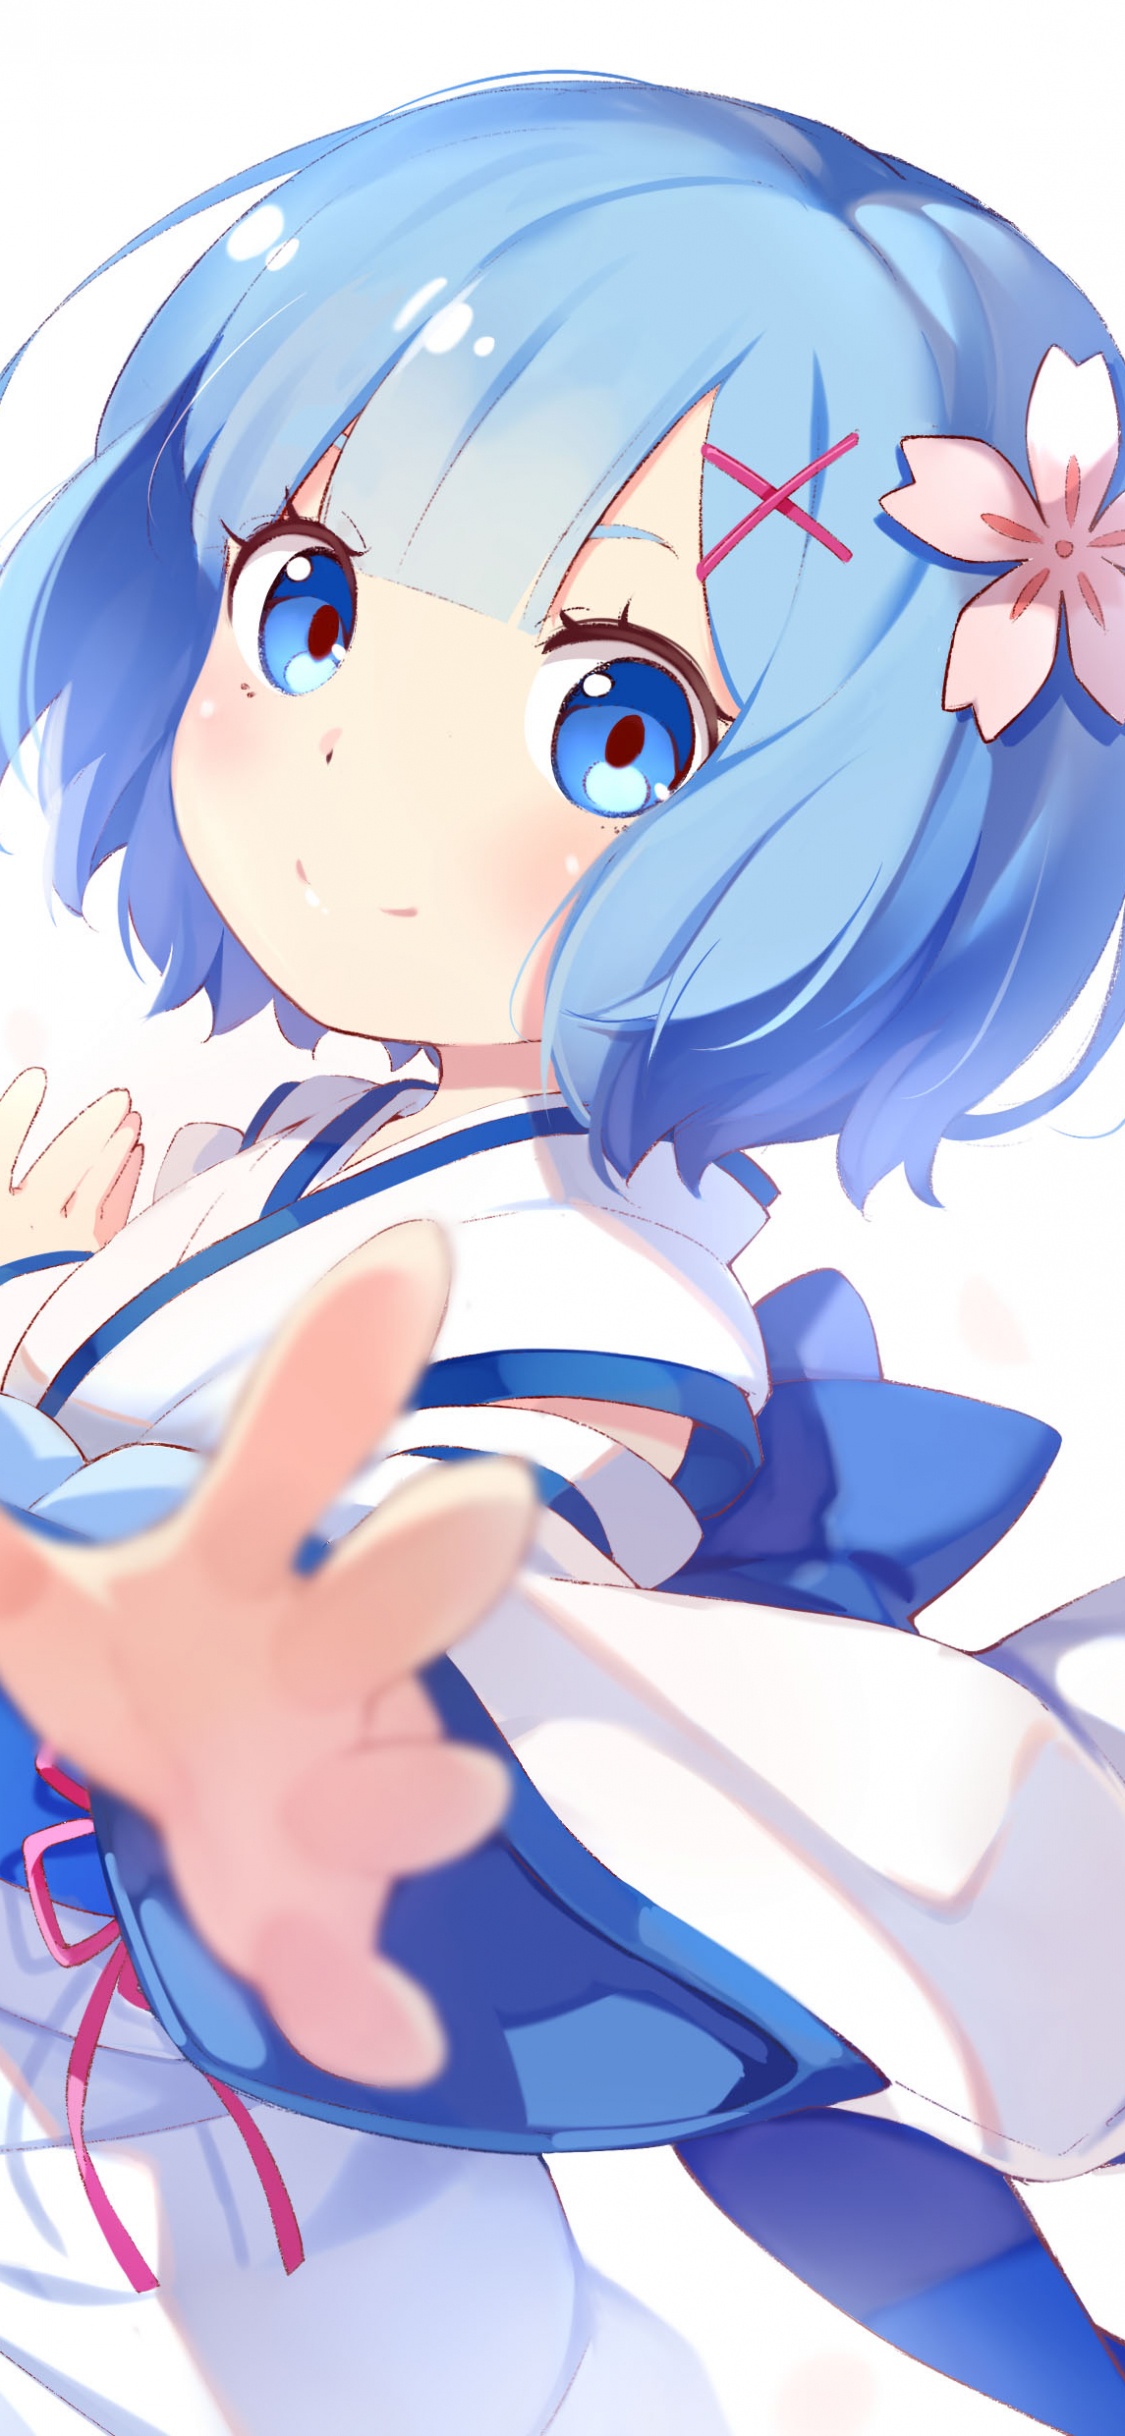 Fille en Robe Bleue Personnage Anime. Wallpaper in 1125x2436 Resolution